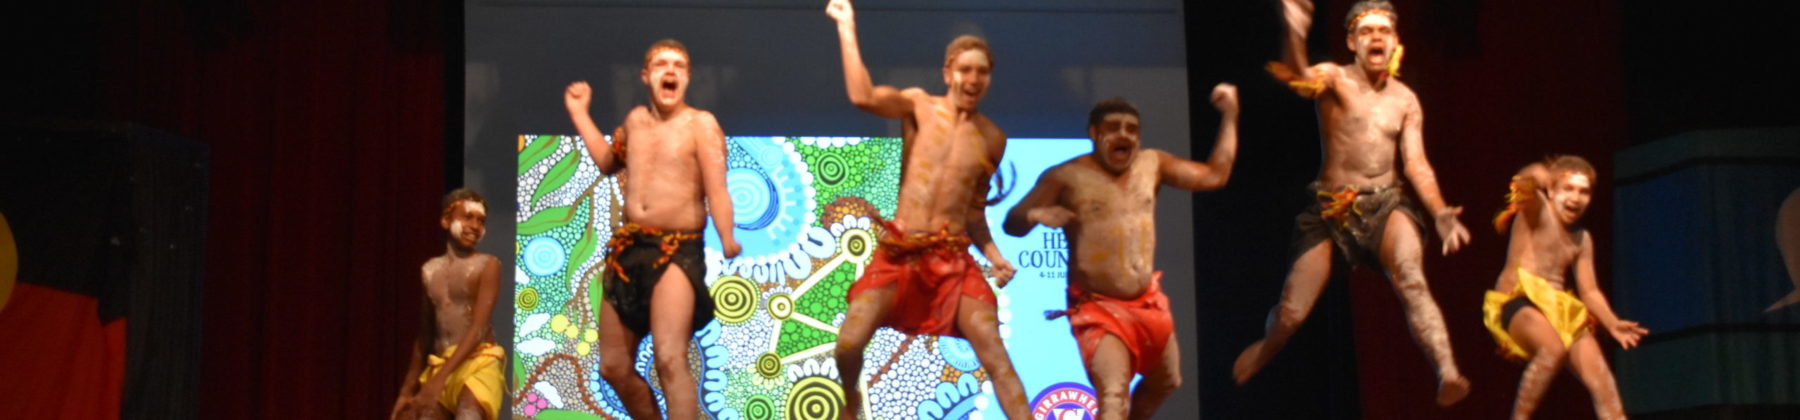 Aboriginal boys painted in traditional body jumping on stage